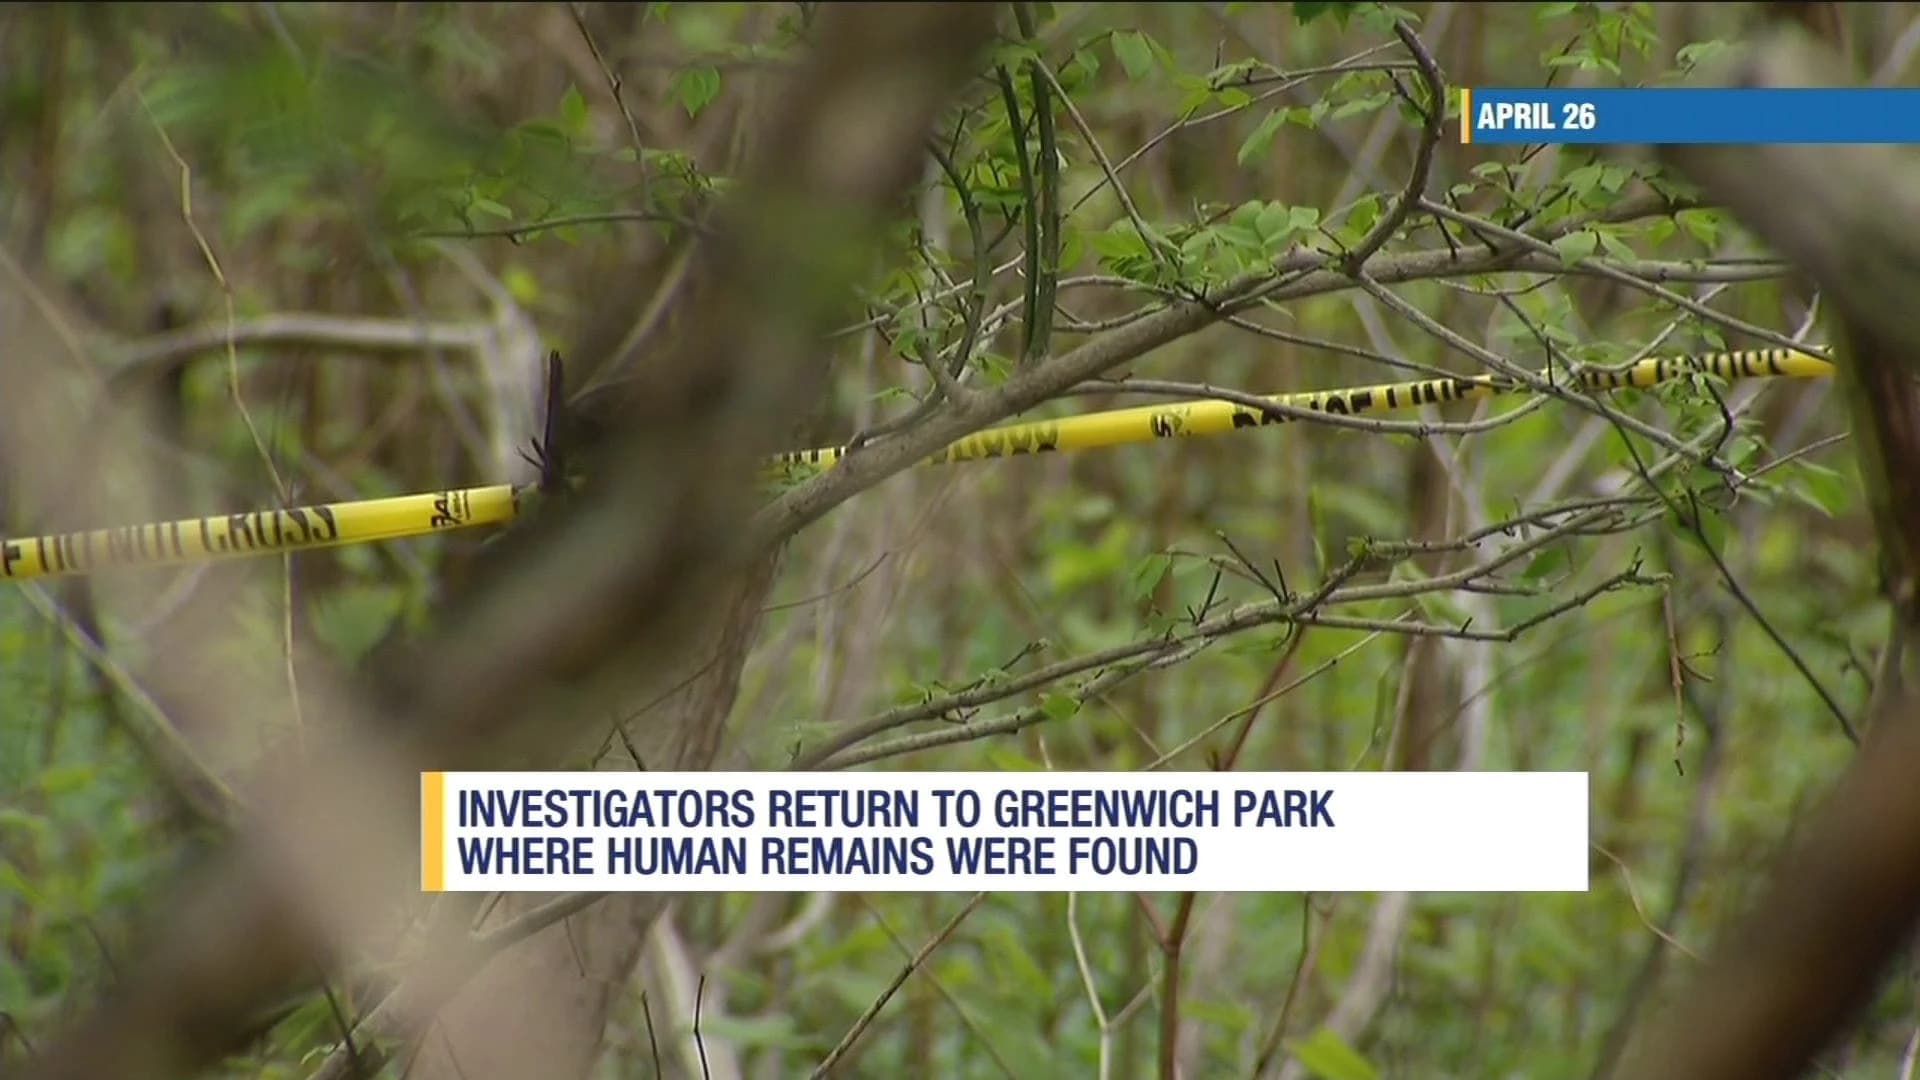 Investigators look for additional evidence connected to remains at park